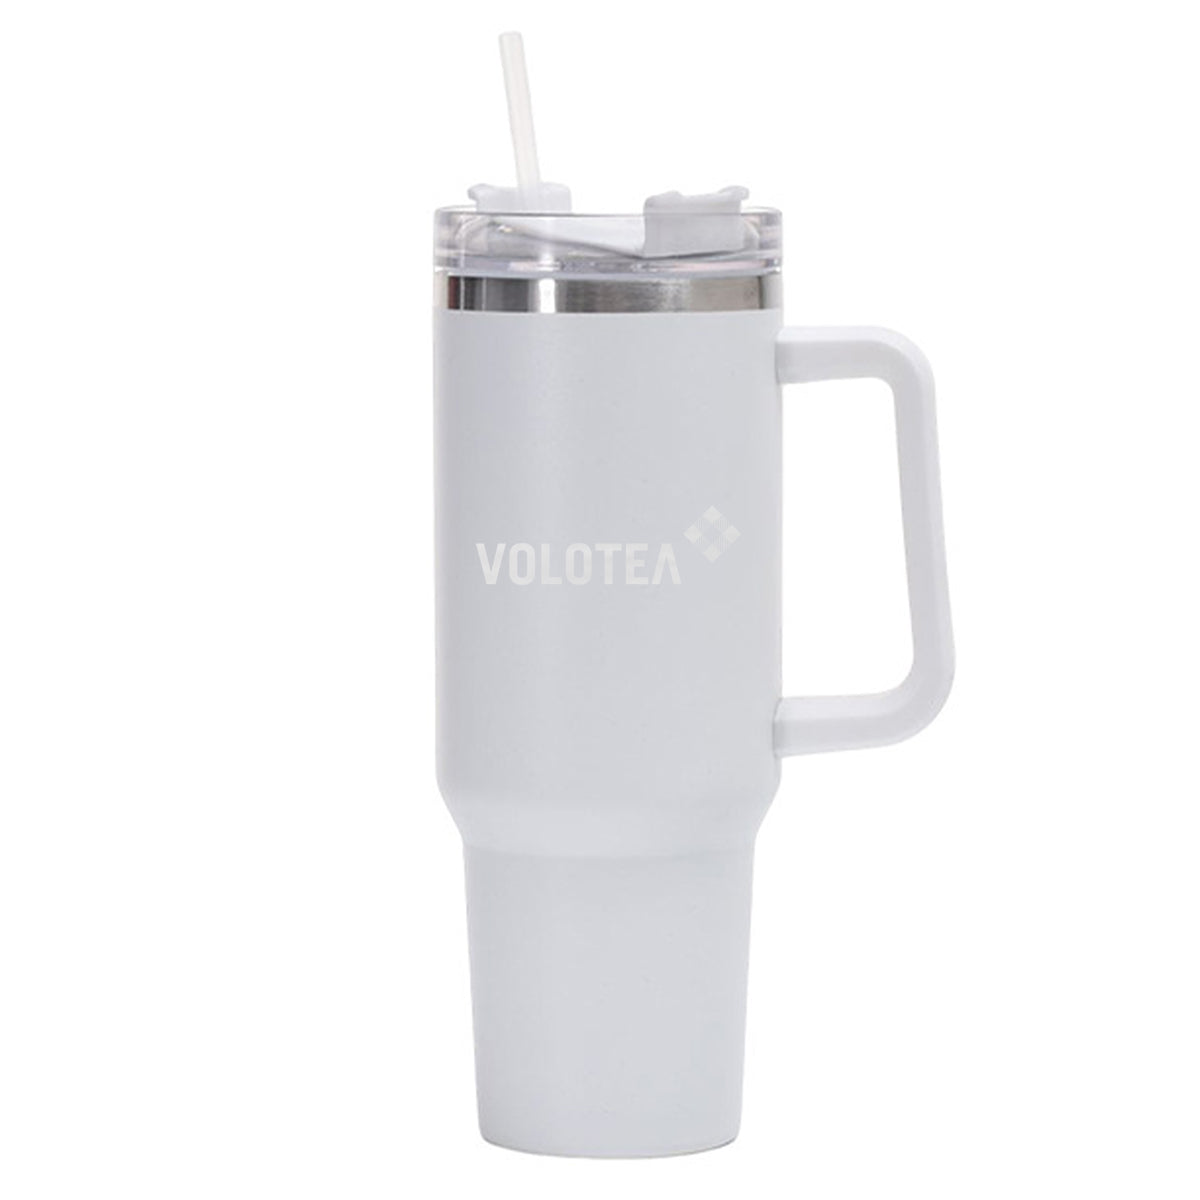 Volotea Airlines Designed 40oz Stainless Steel Car Mug With Holder